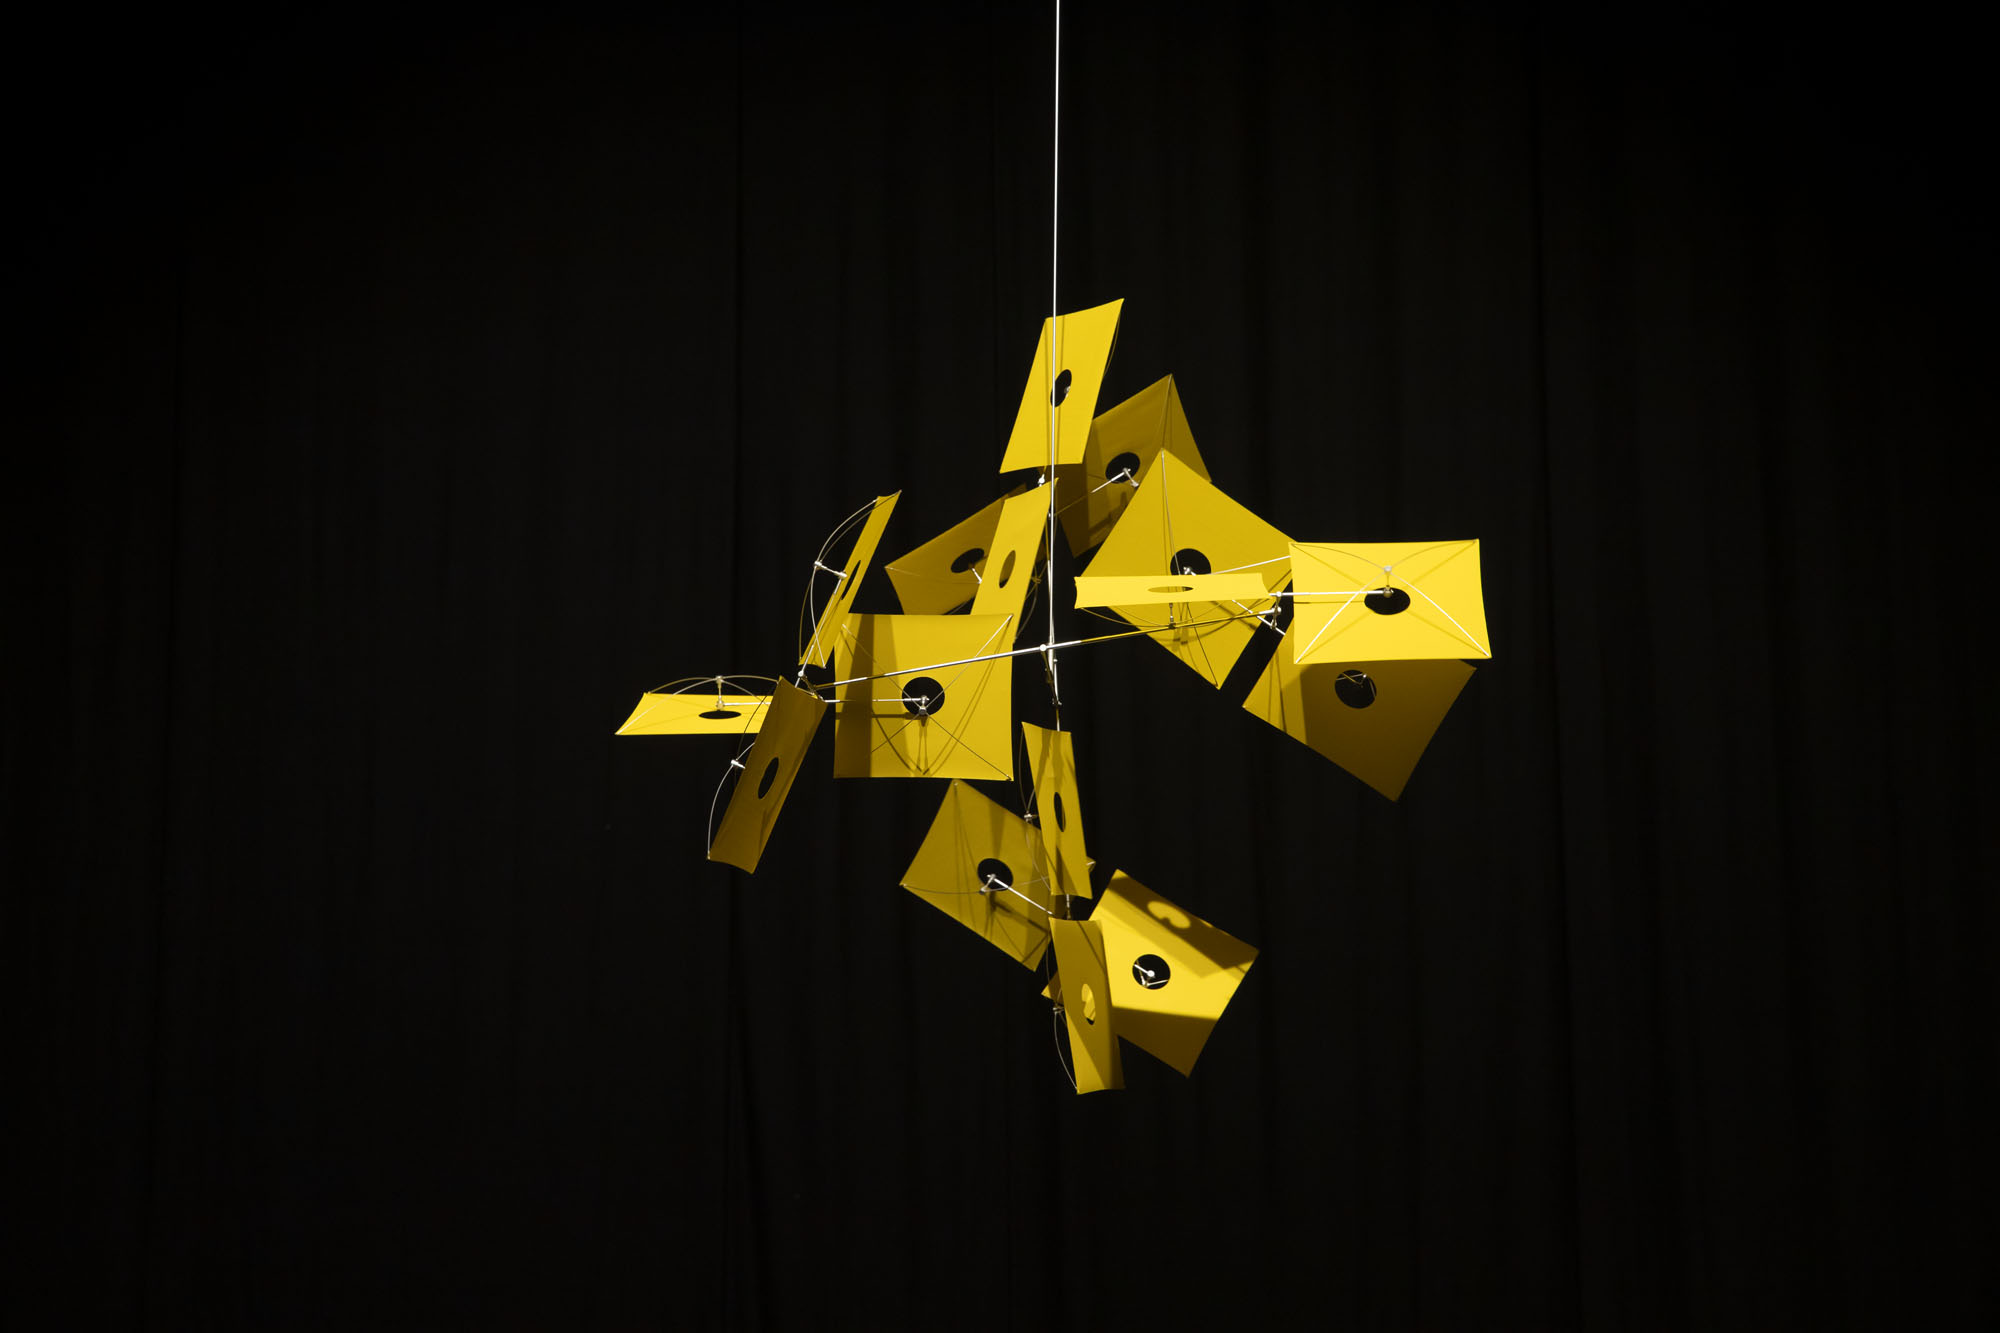 a yellow sculpture by Susumu Shingu suspended in front of a black background